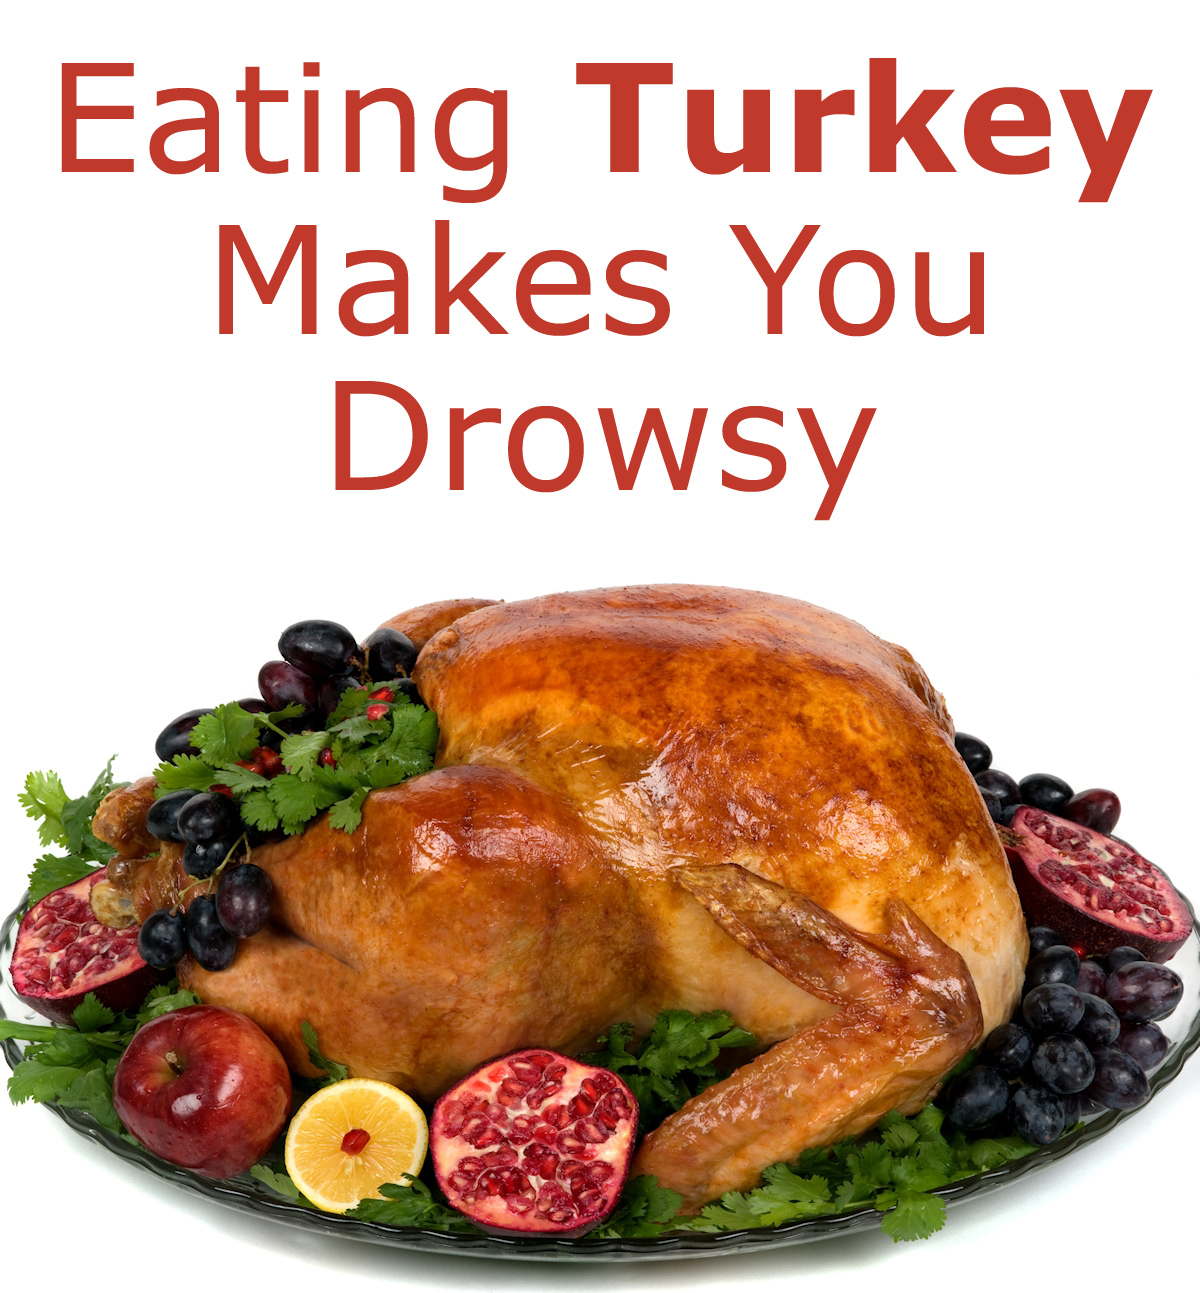 Does Eating Turkey Make You Drowsy?